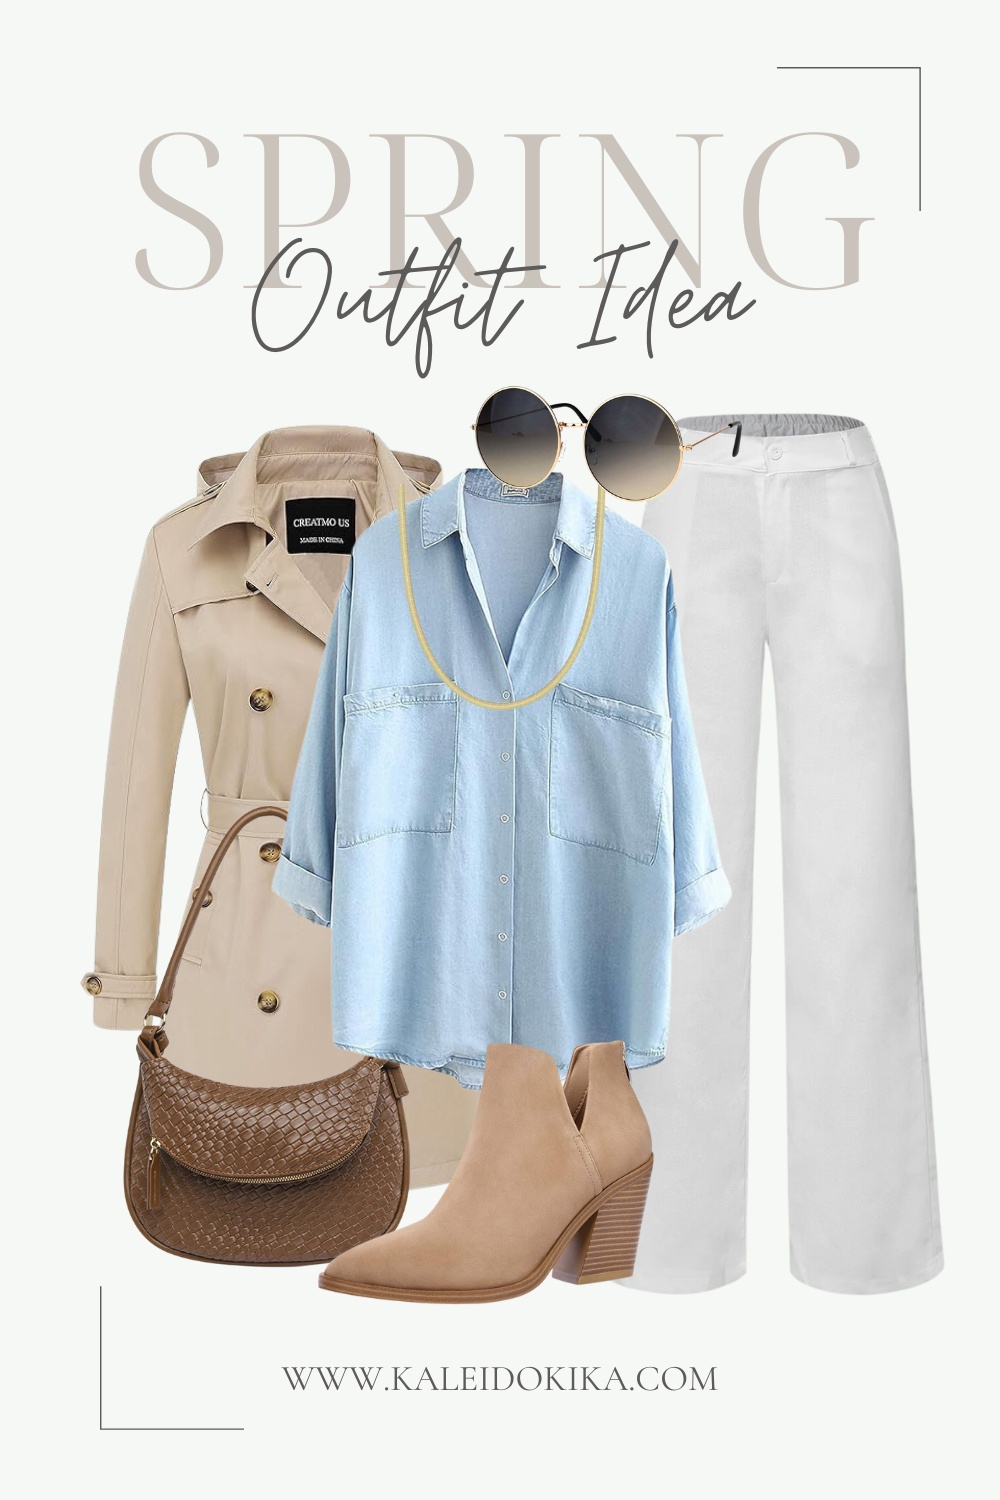 Image showing an outfit of the day idea for spring